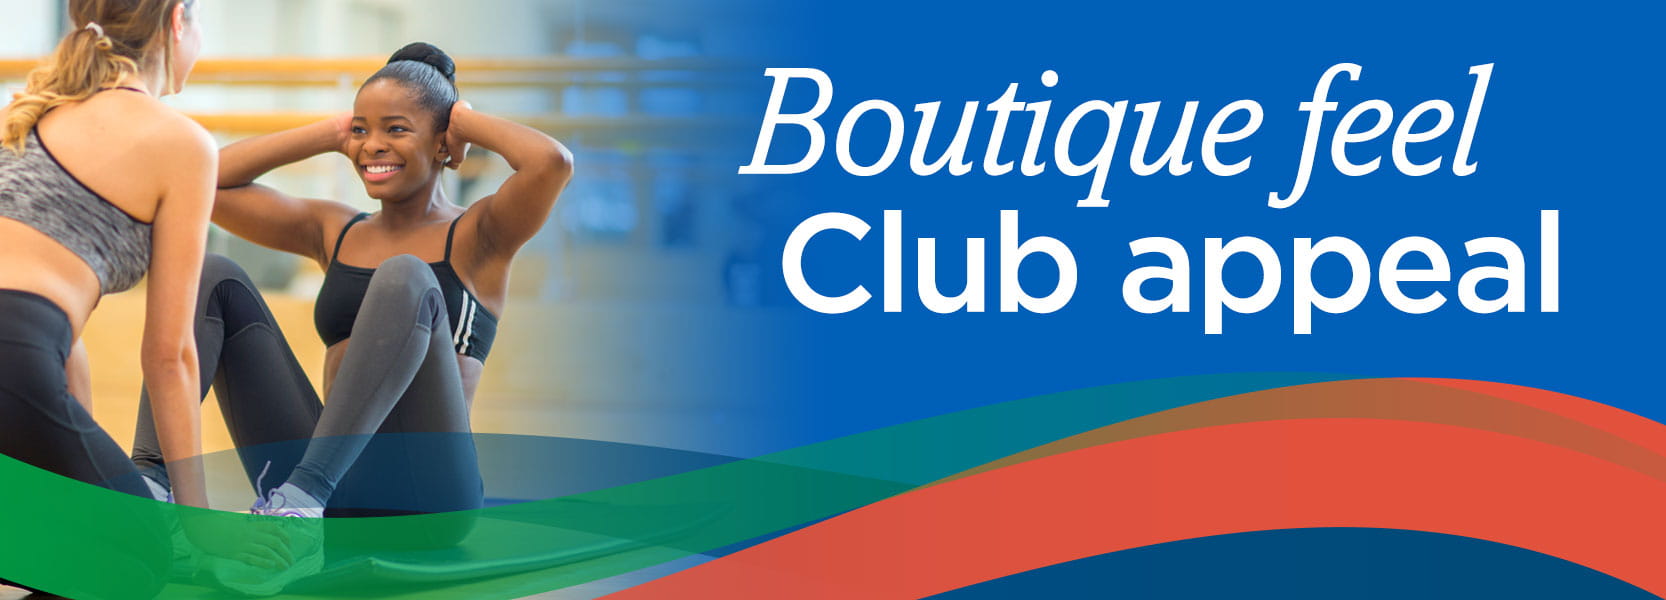 Boutique feel, Club appeal  Get your first month FREE!